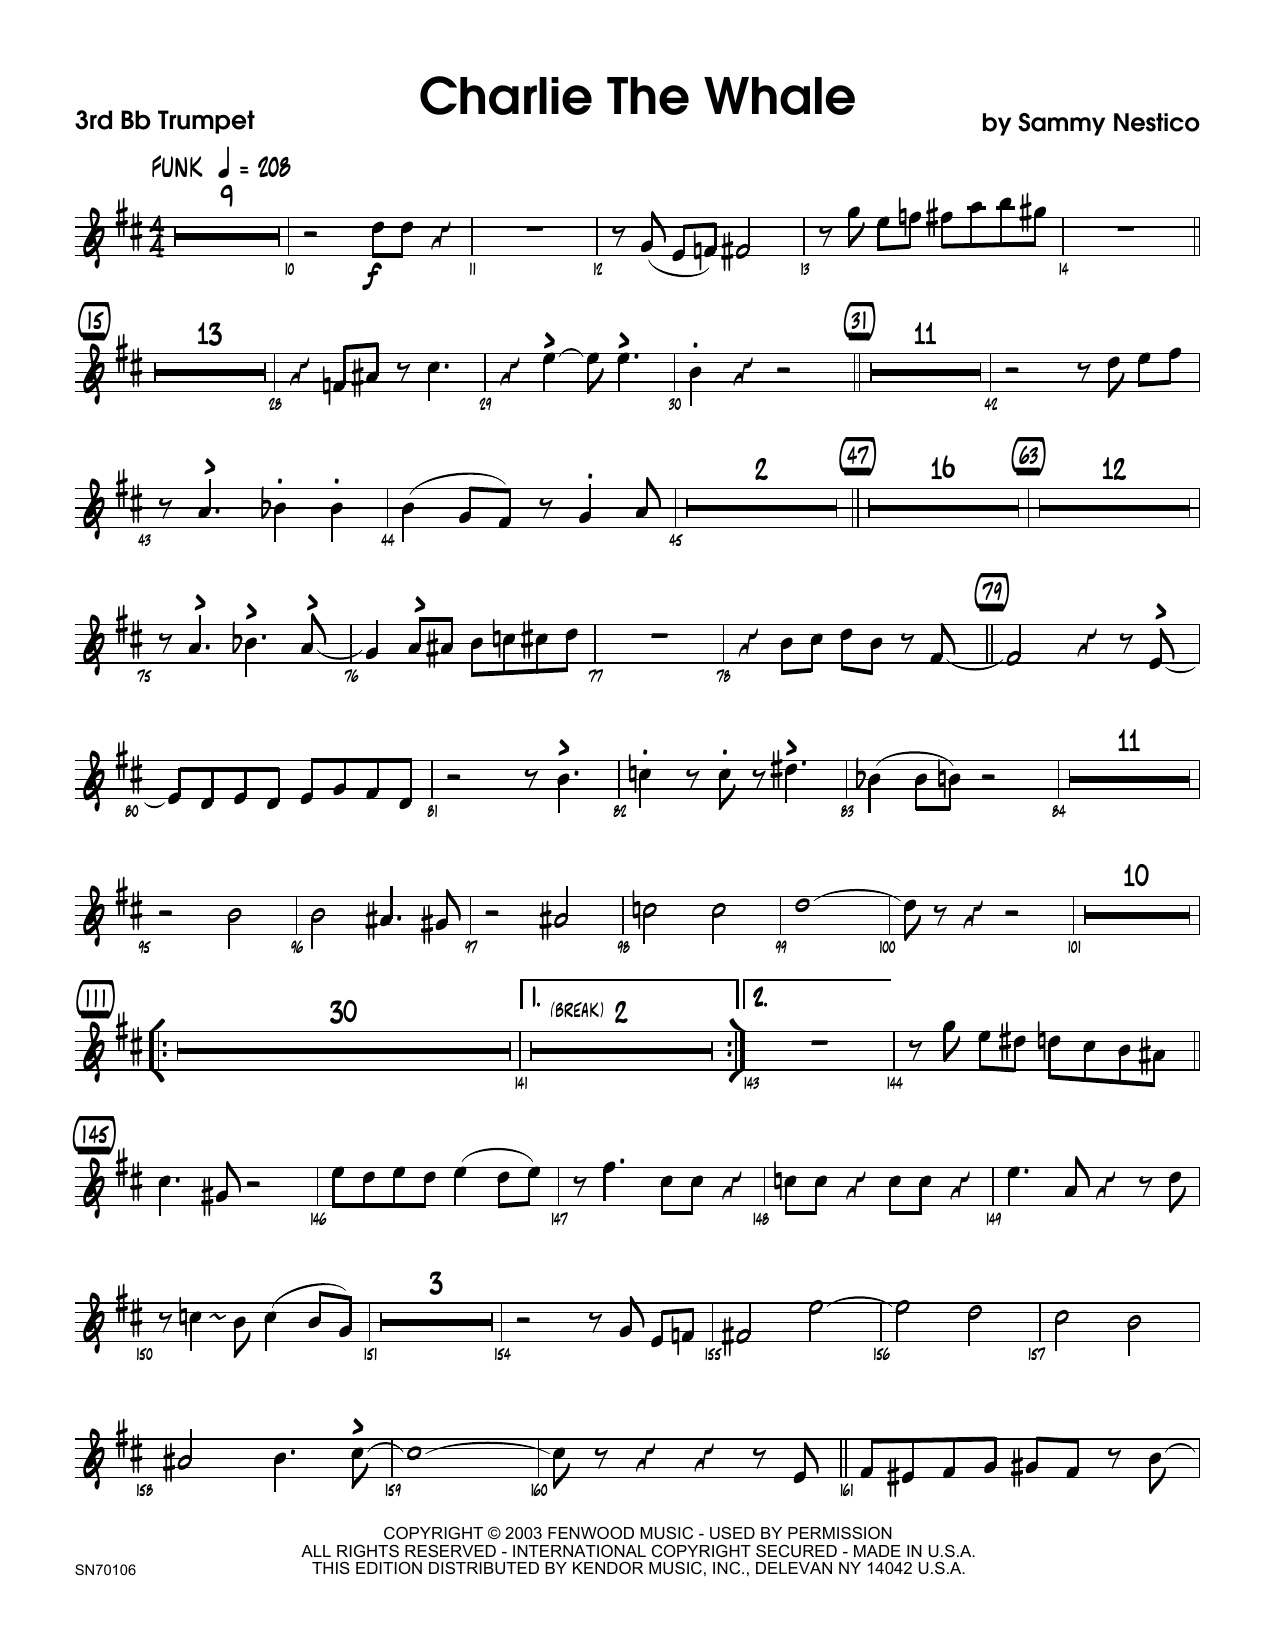 Download Sammy Nestico Charlie The Whale - 3rd Bb Trumpet Sheet Music